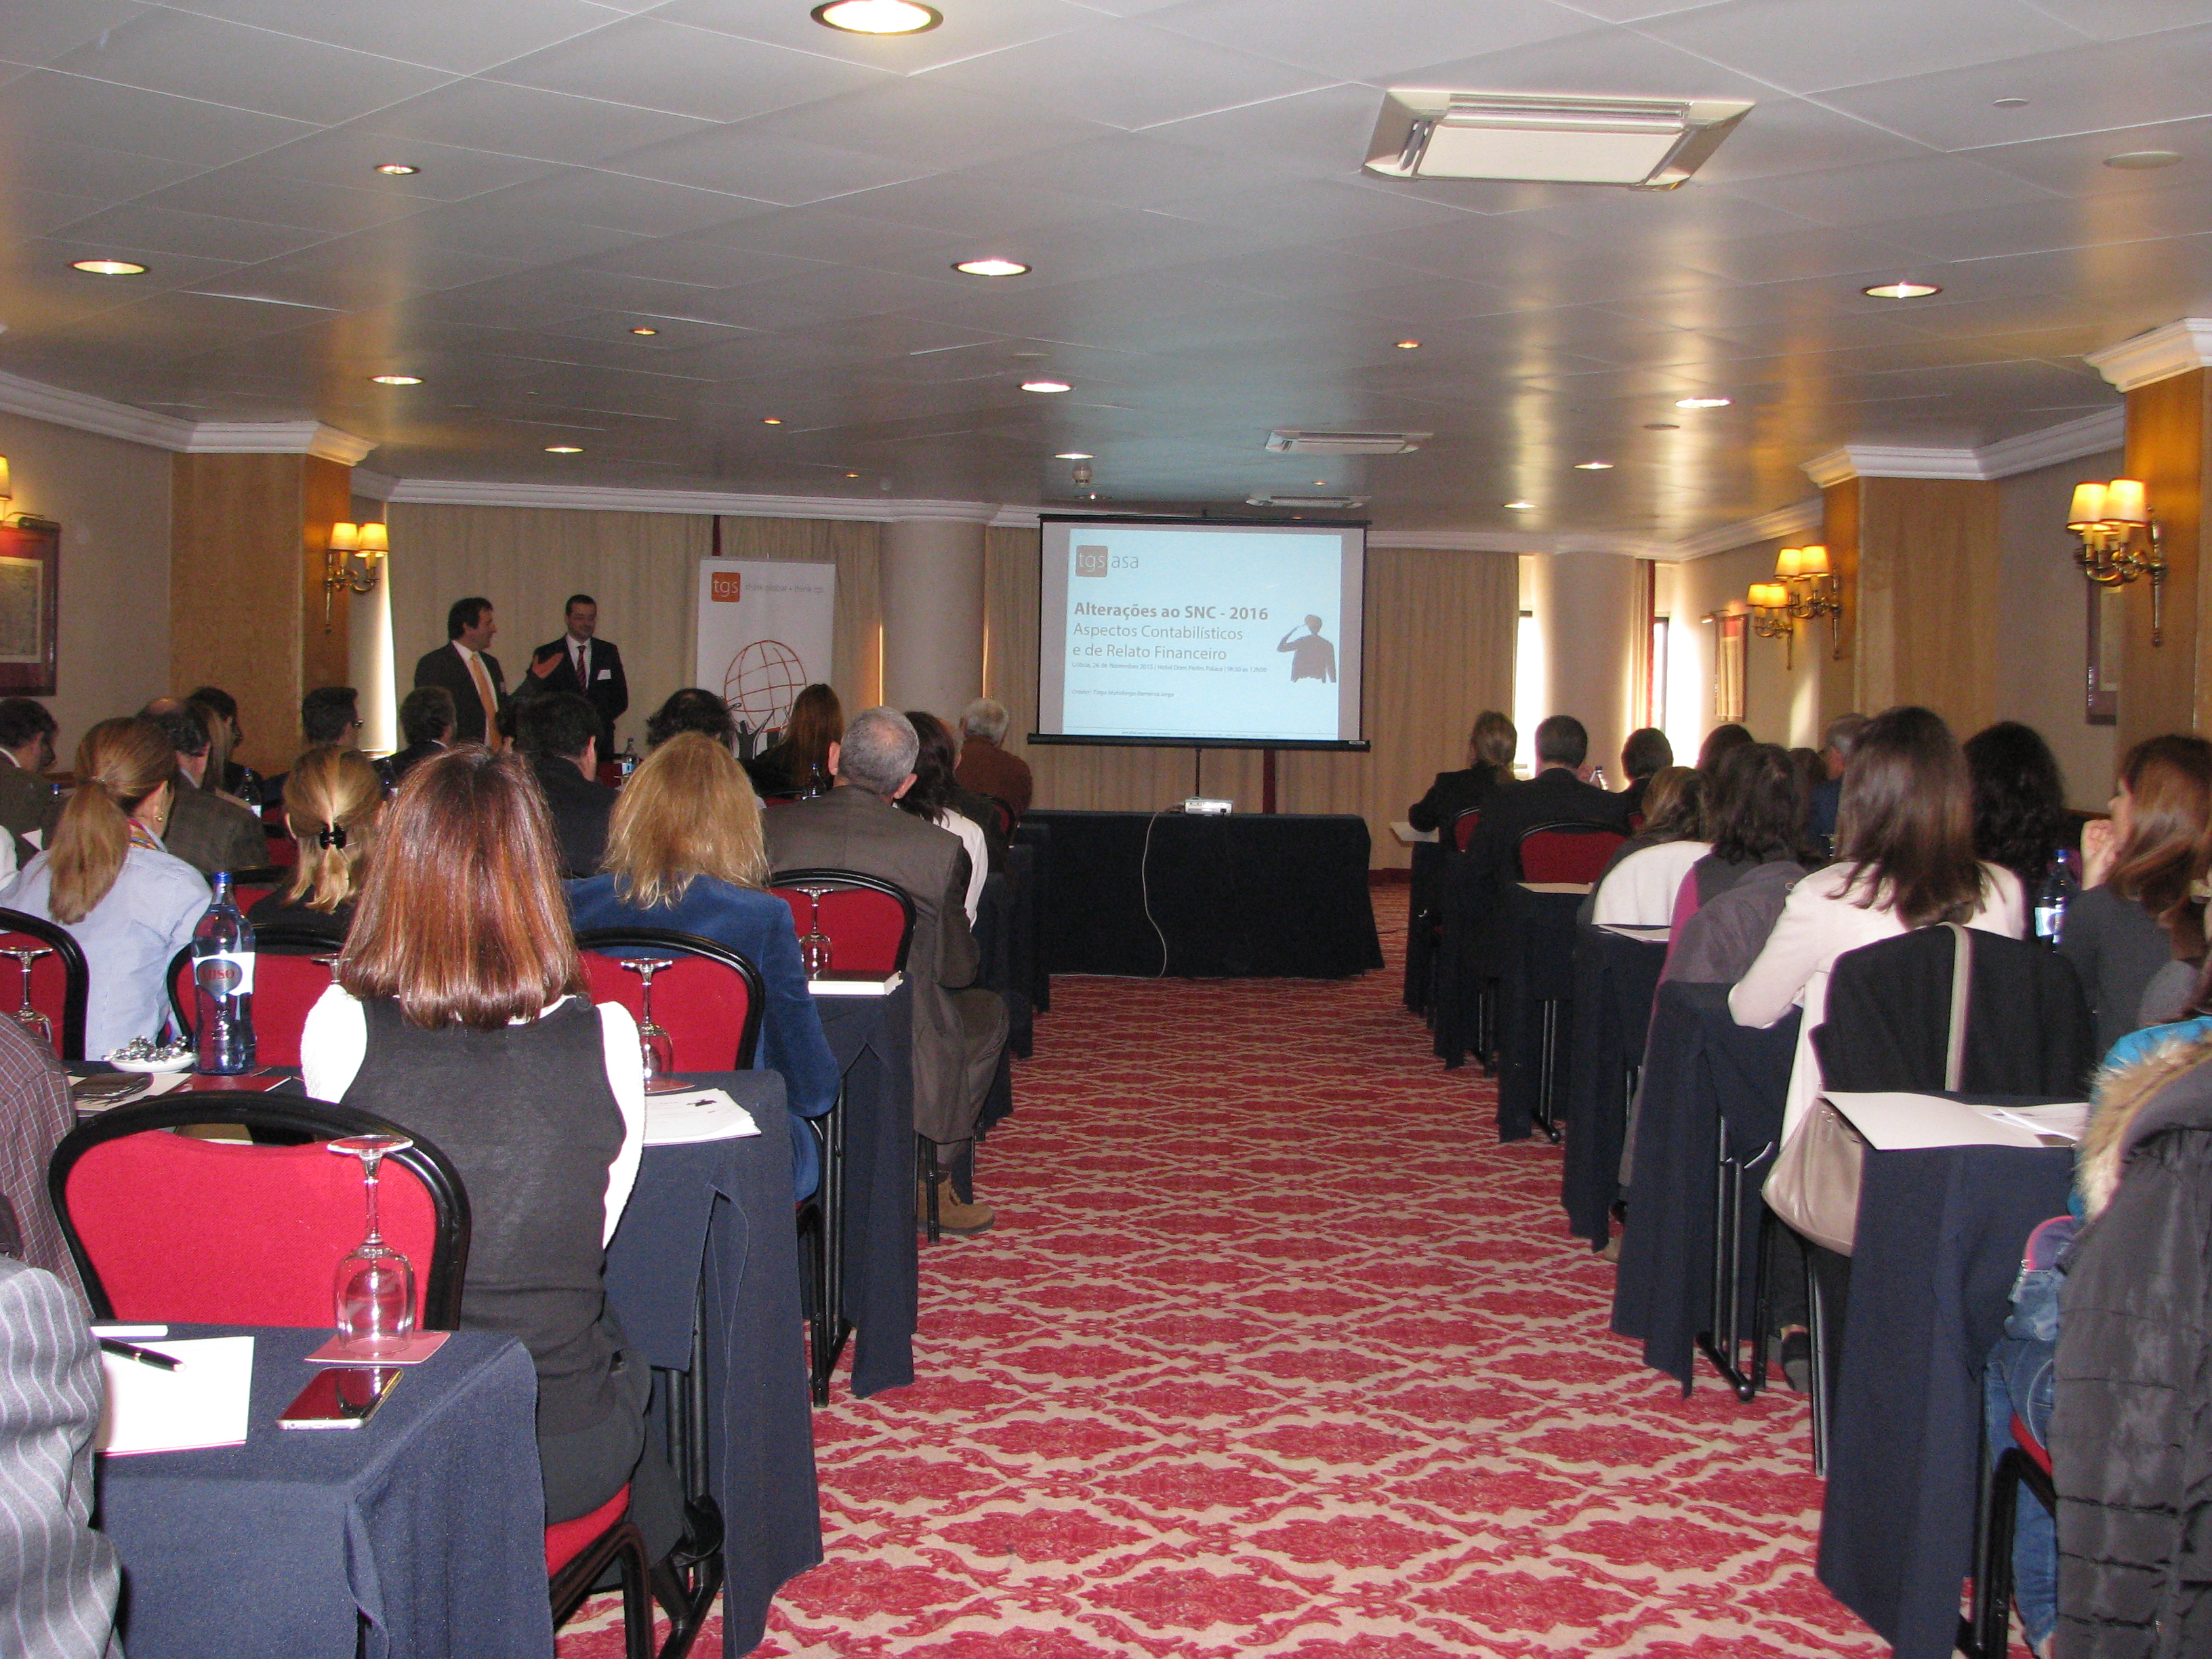 tgs asa organises an event about the new Accounting Standards System